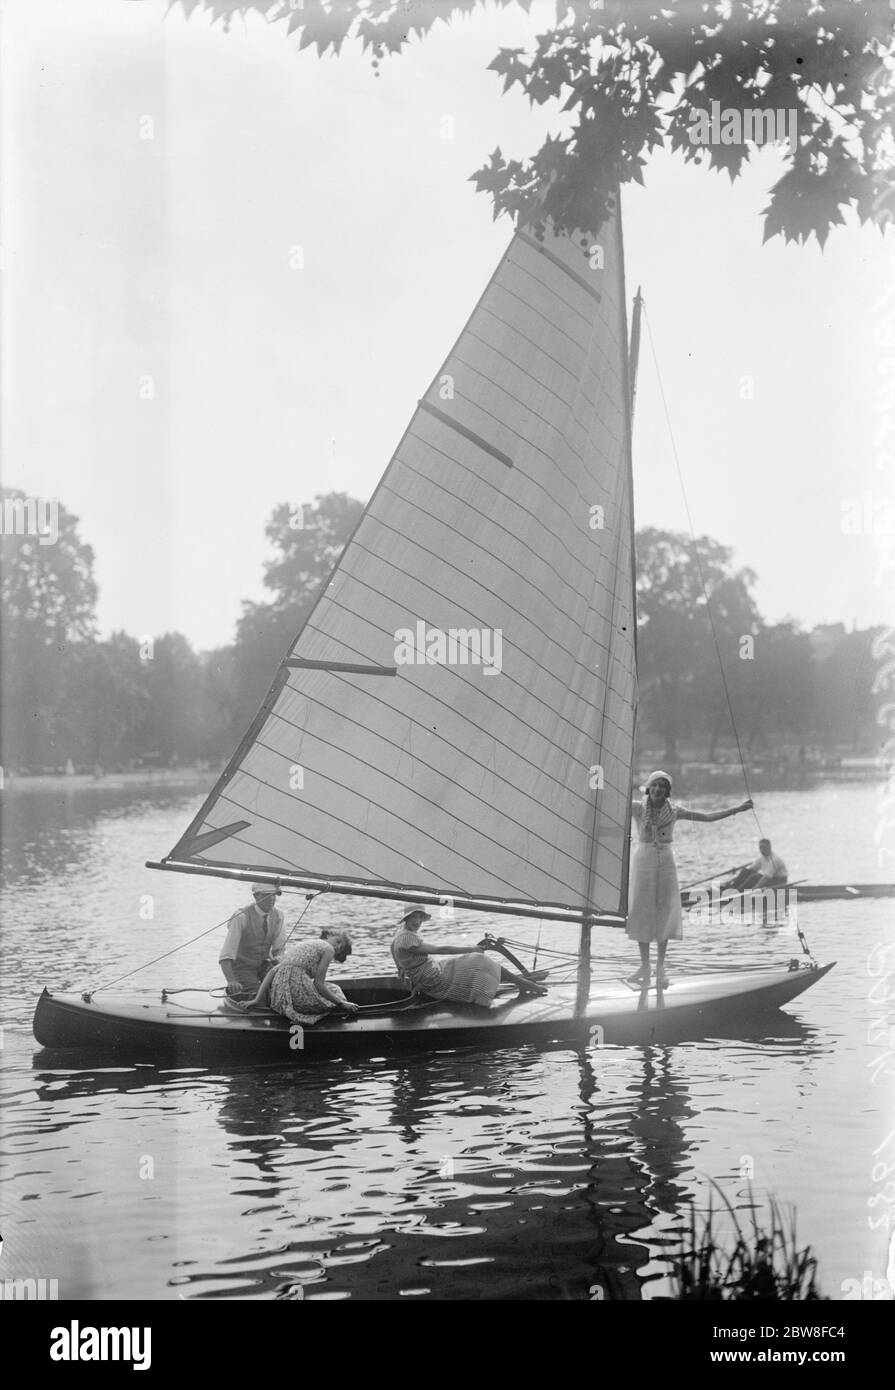 Sailing thrills in the Heart of London . Small sailing yachts have just been installed to add to the pleasures of Londoners on the lake , with its picturesque surroundings , in Regents Park . 18 August 1932 Stock Photo